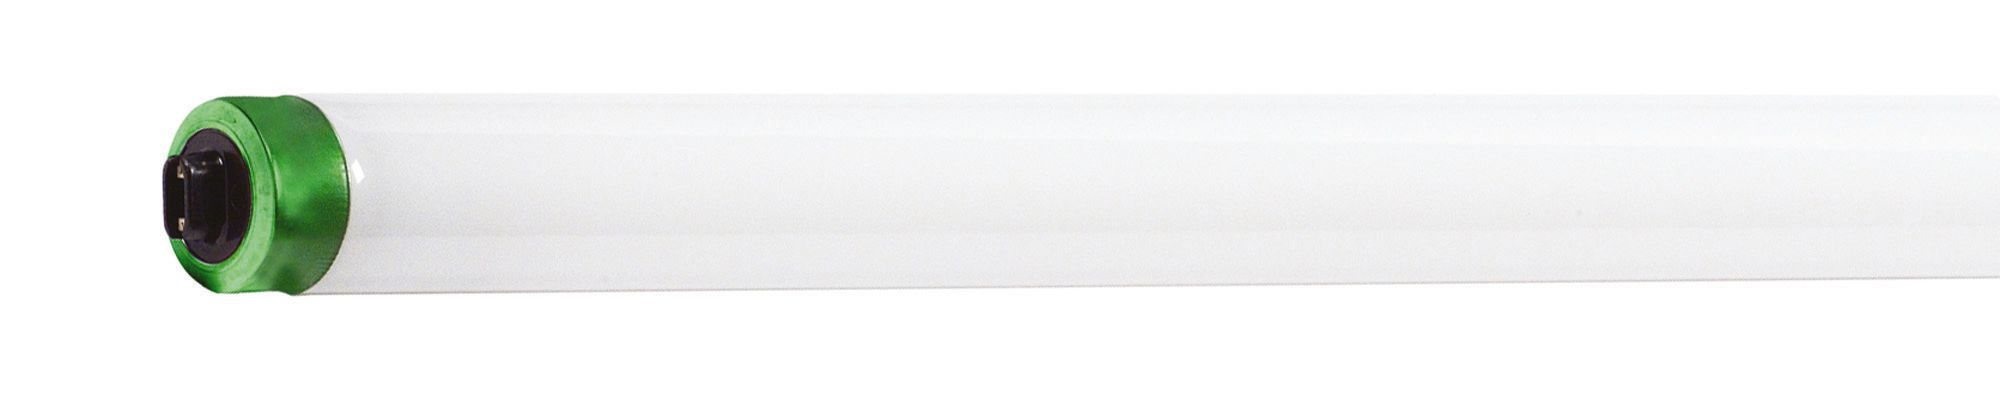 23687-7 (F96T8/TL835/HO/PLUS/ALTO) Fluorescent Lamp Philips Lighting;Signify Lamps